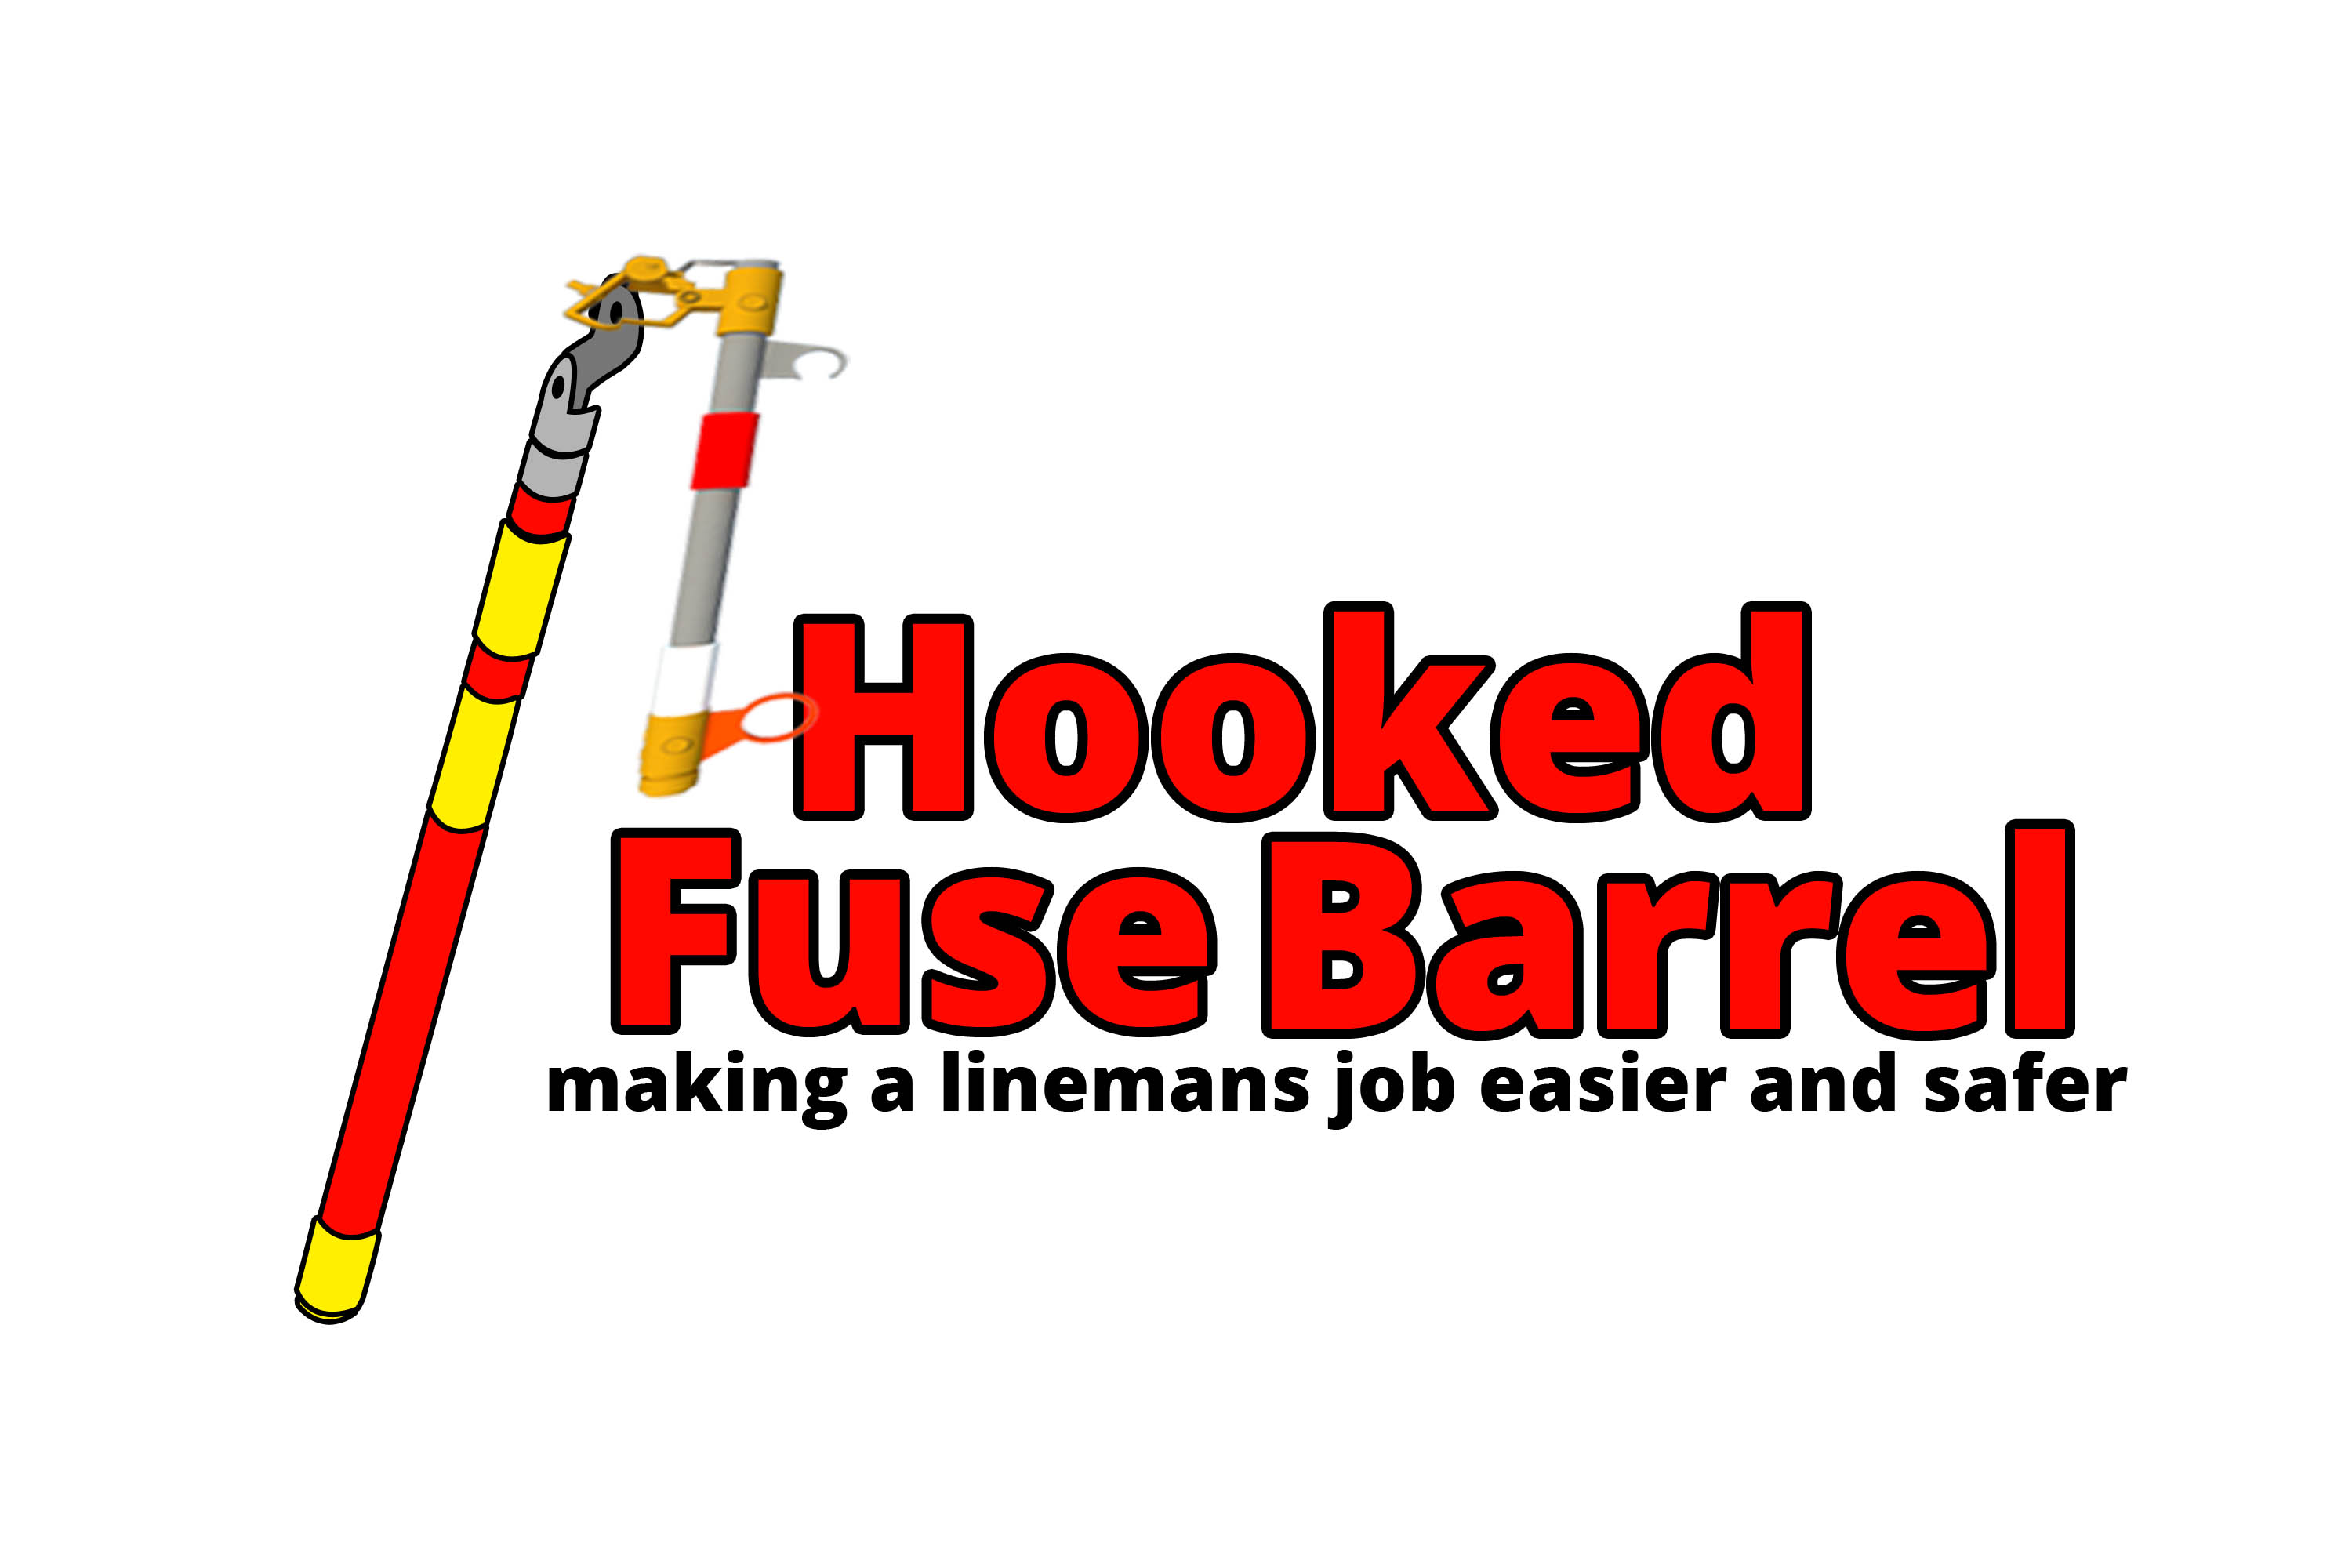 The Hooked Fuse Barrel is specifically designed for linemen or other people who need to work around electrical poles.